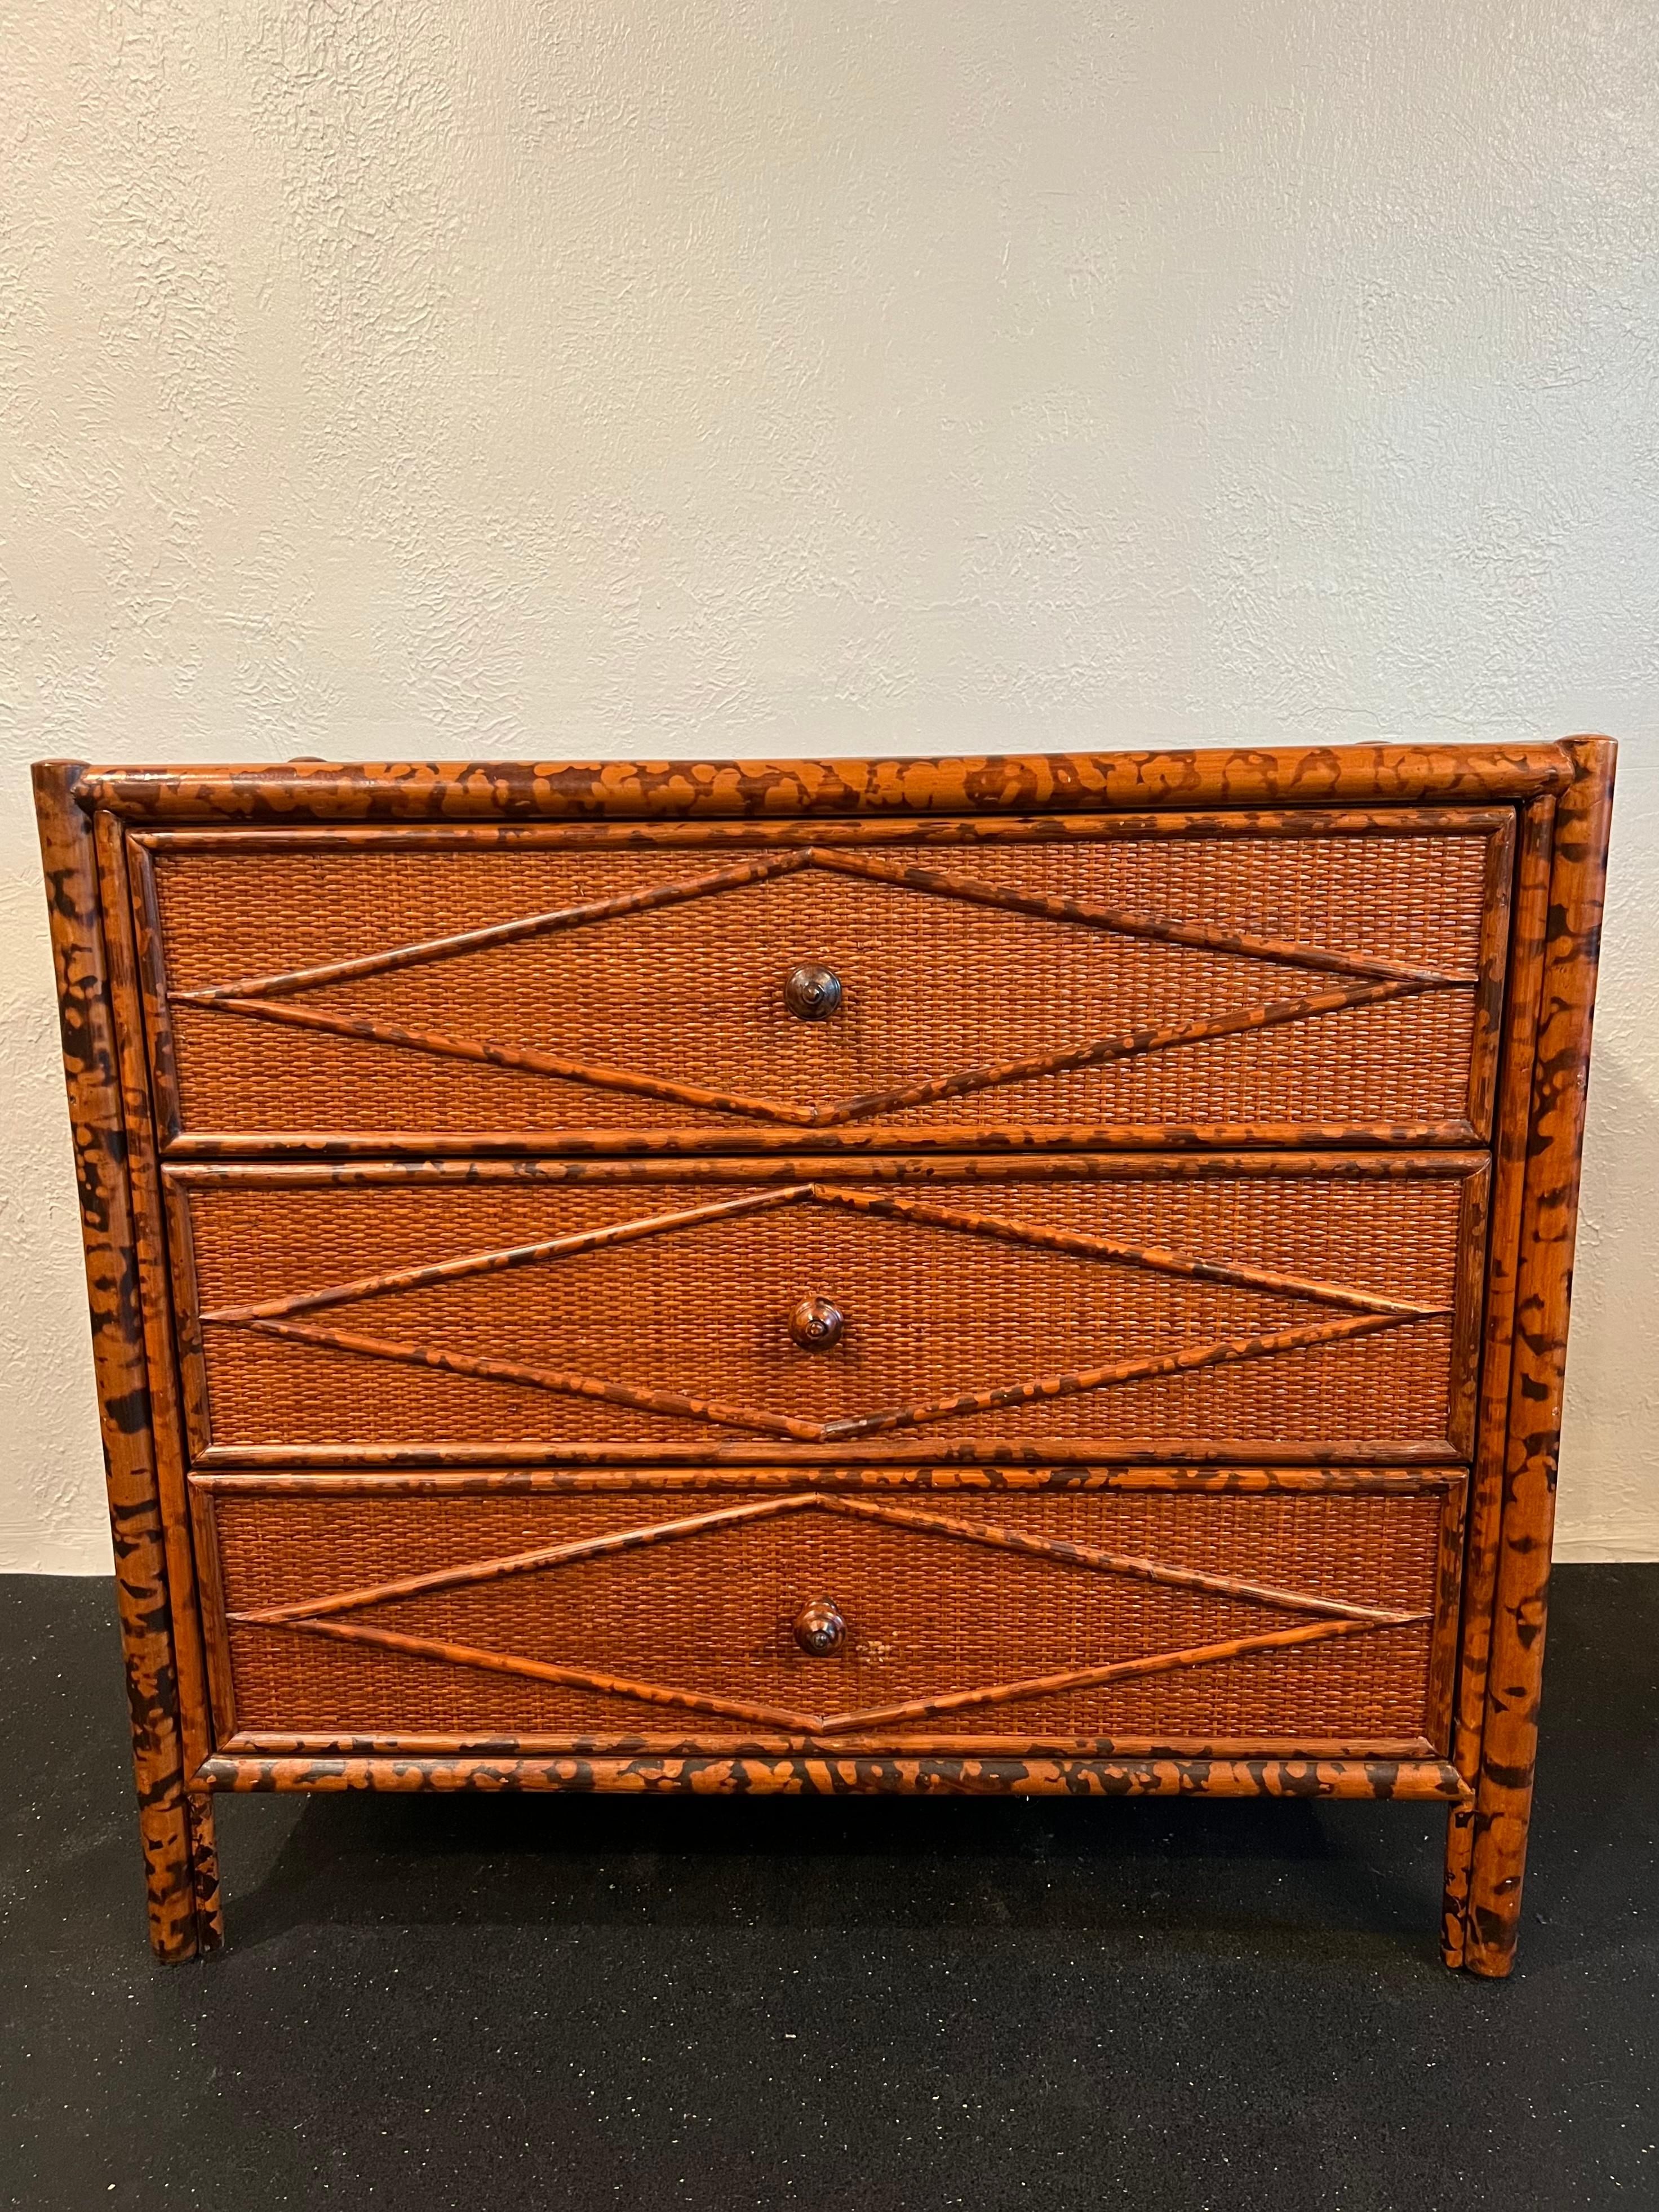 British colonial style burnt bamboo and cane chest of drawers. Slight wear to finish of cane (please refer to photos). Matching pair of nightstands and dresser available in separate listings. 

Would work well in a variety of interiors such as